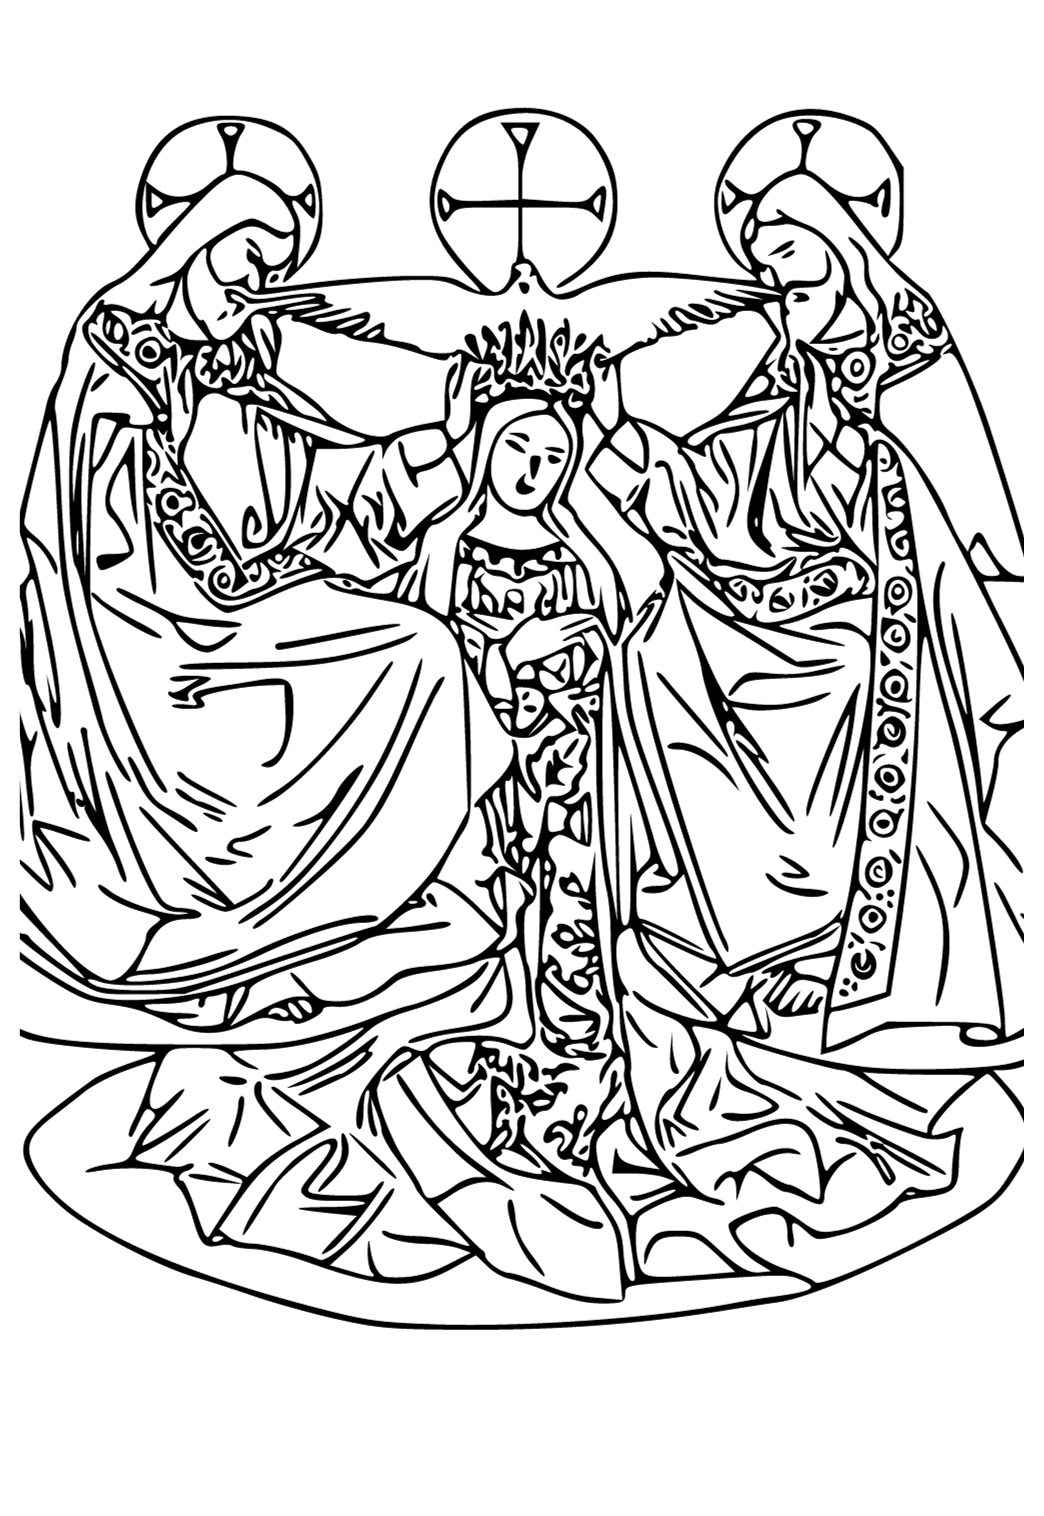 Free printable catholic characters coloring page for adults and kids